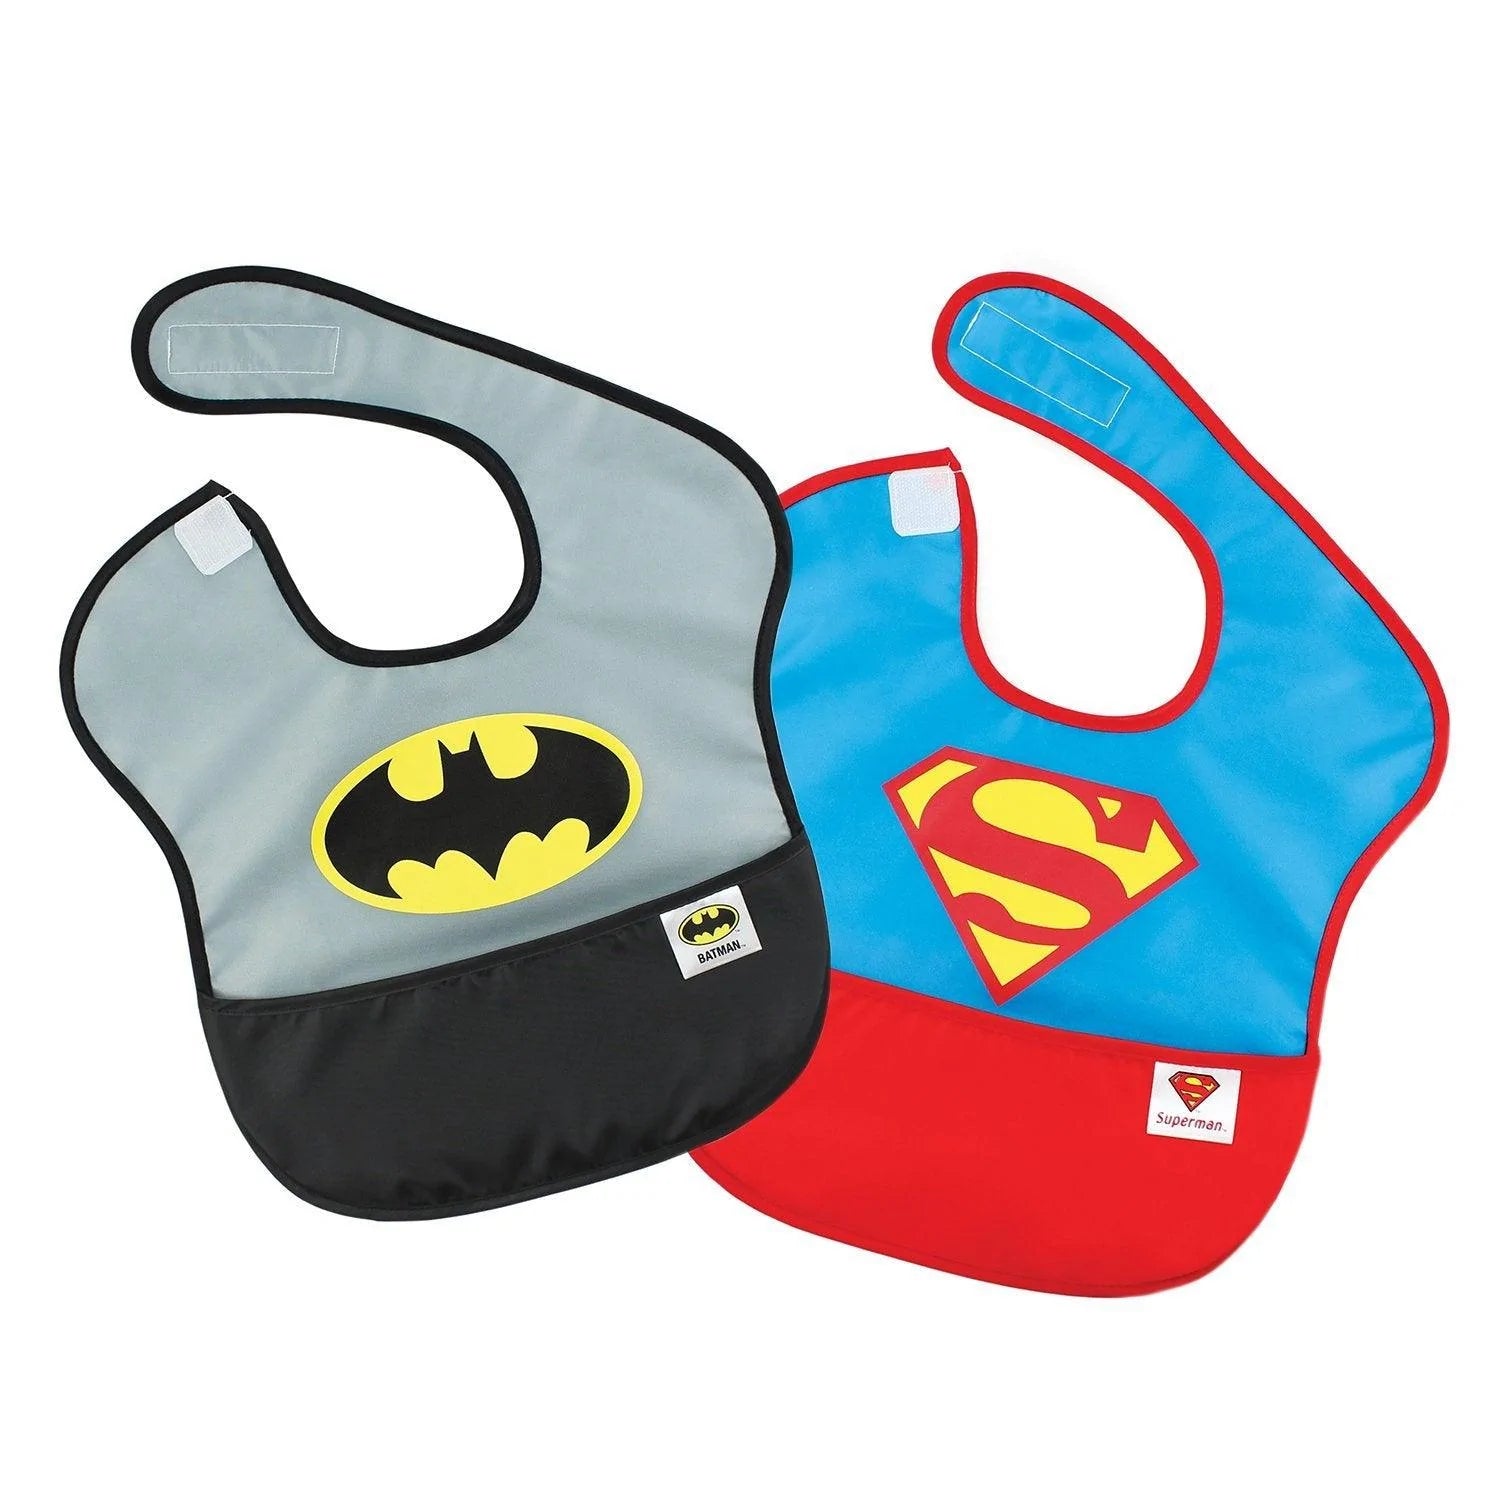 DC Comics SuperBib with Cape for 6 to 24 months - Superman